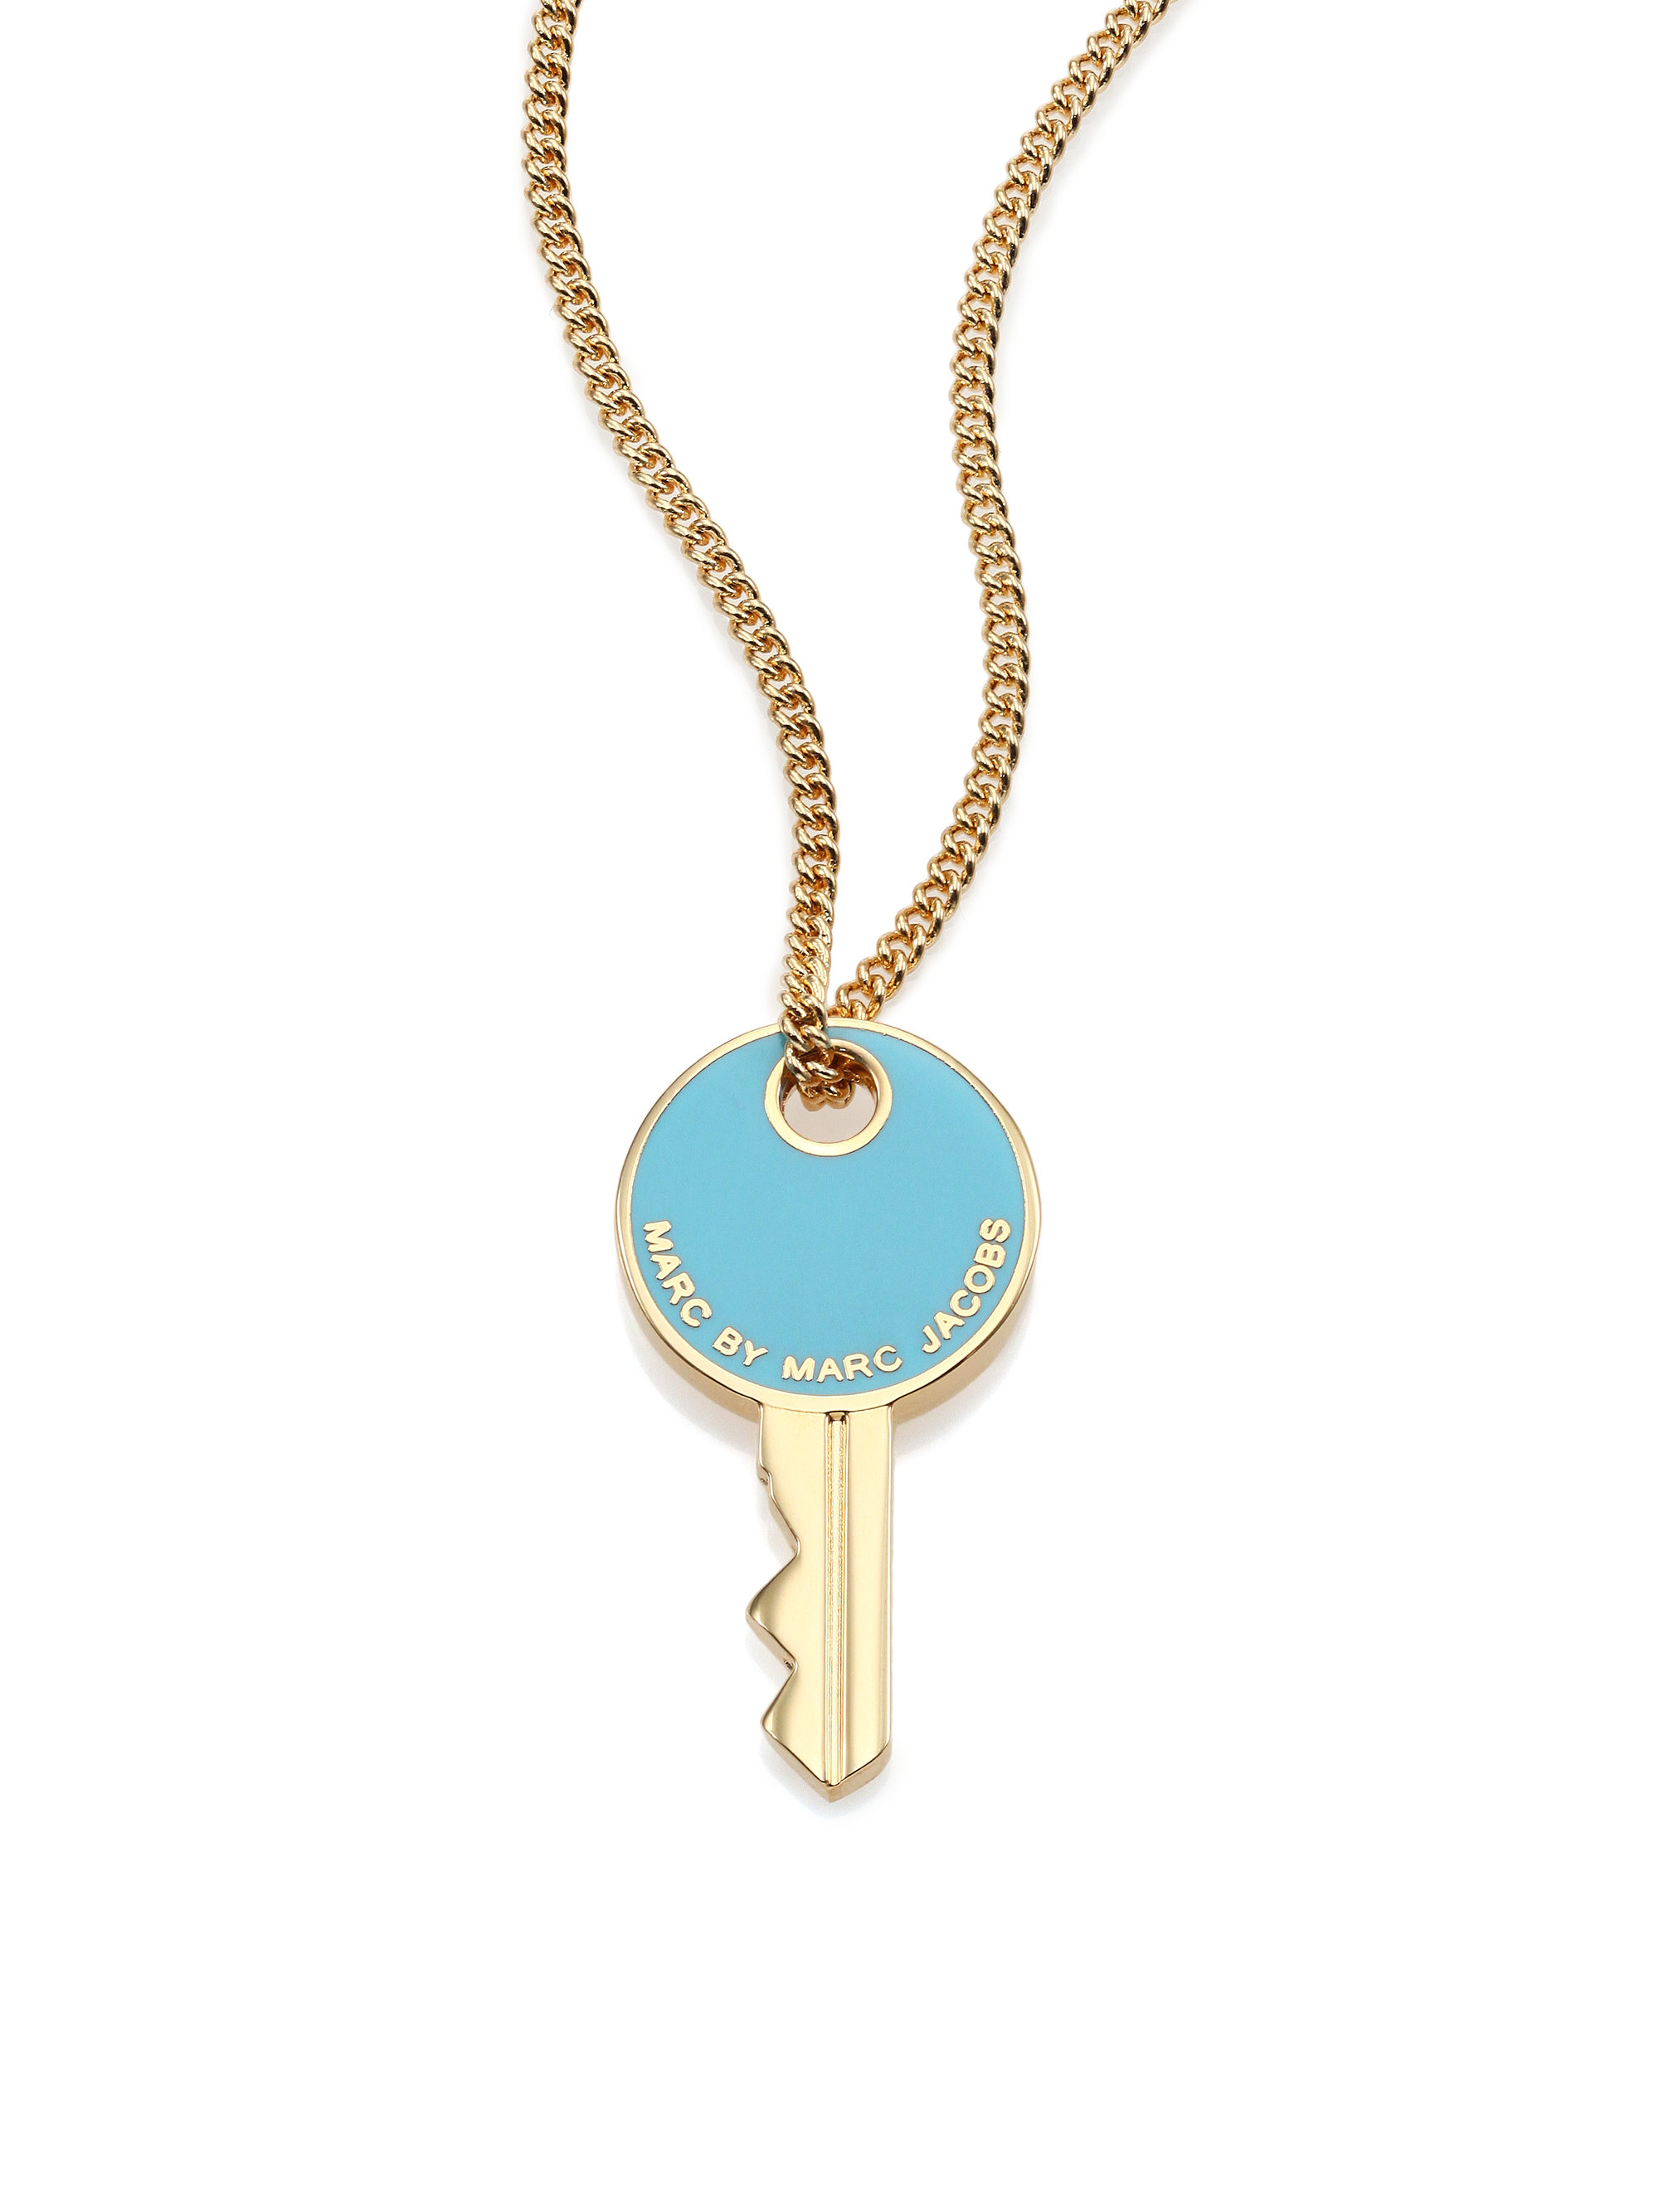 Marc by marc jacobs Golden Key Pendant Necklace in Blue | Lyst